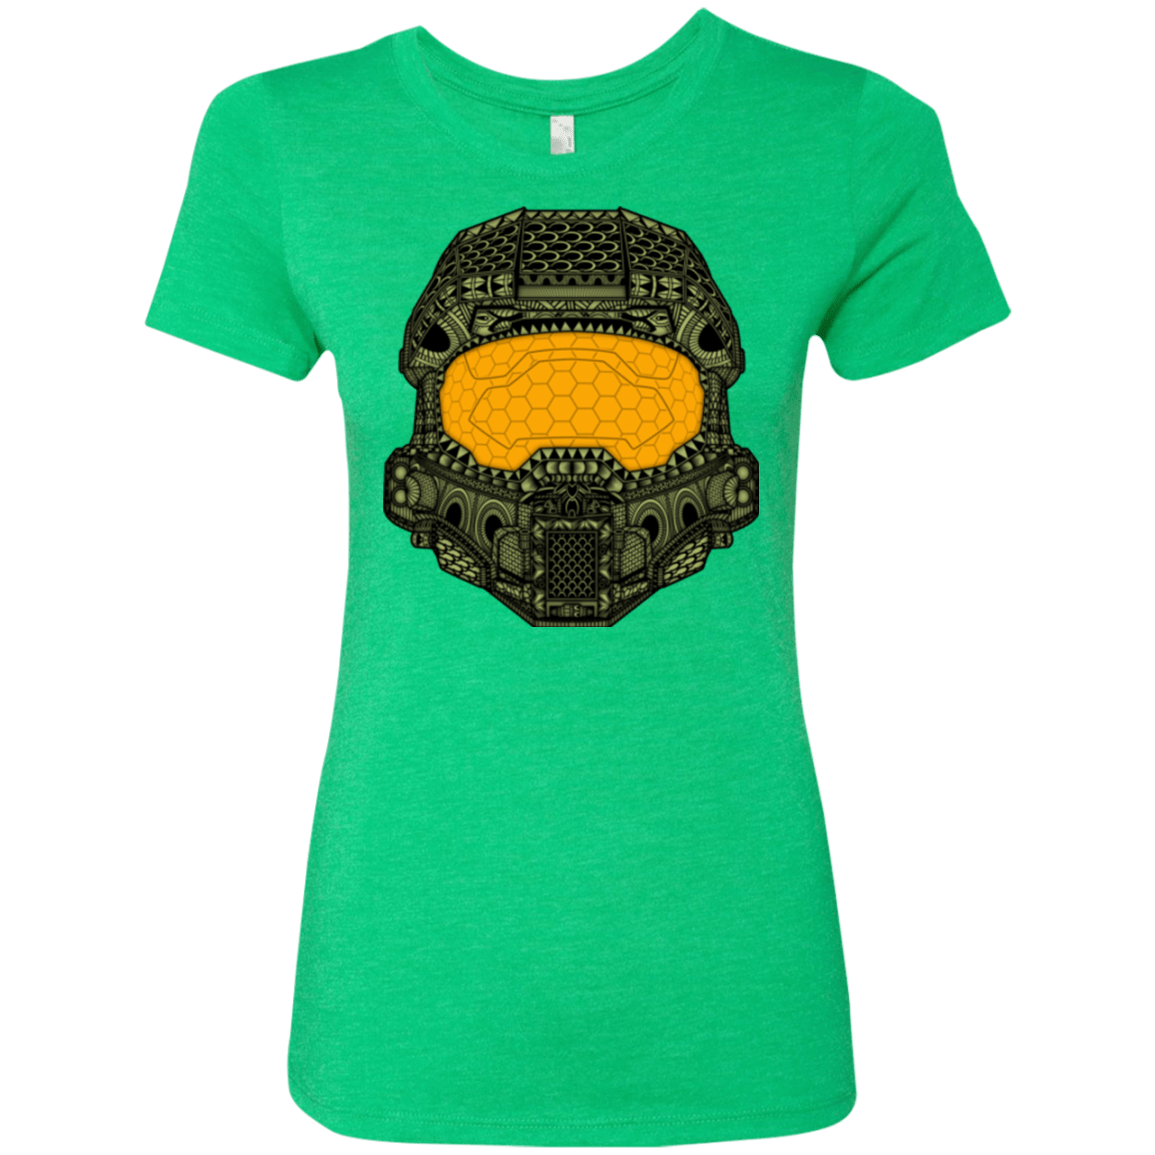 T-Shirts Envy / Small The Chief Women's Triblend T-Shirt